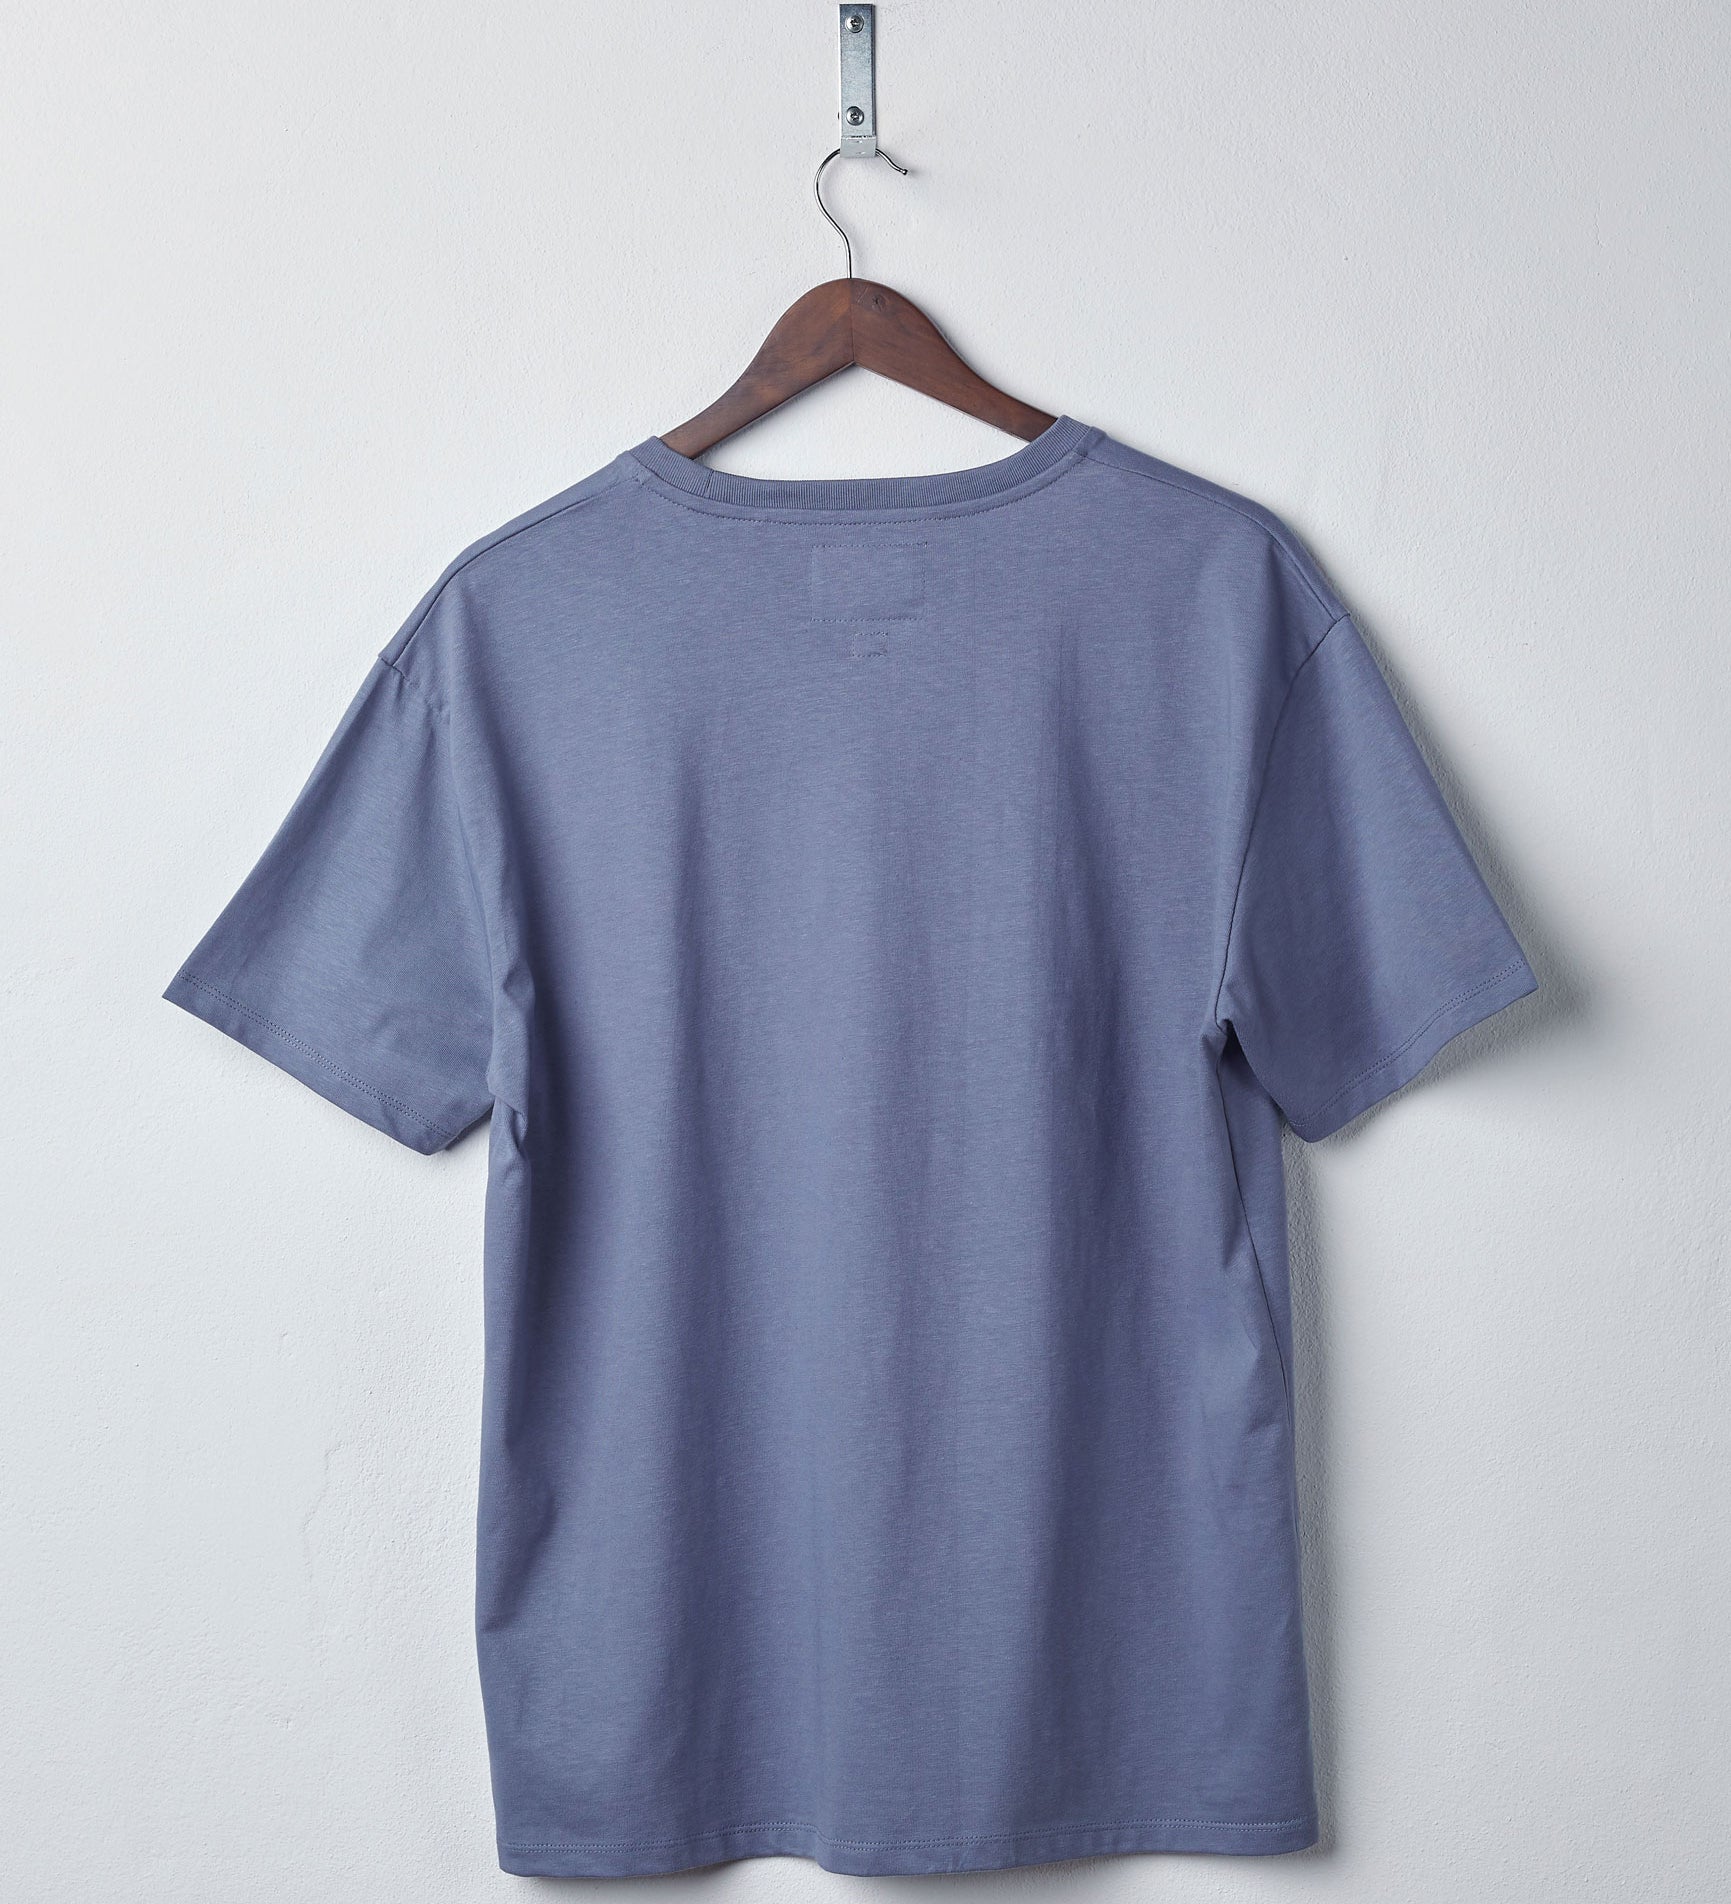 Back view of teal organic cotton #7006 jersey T-shirt by Uskees. Presented on hanger against white background.